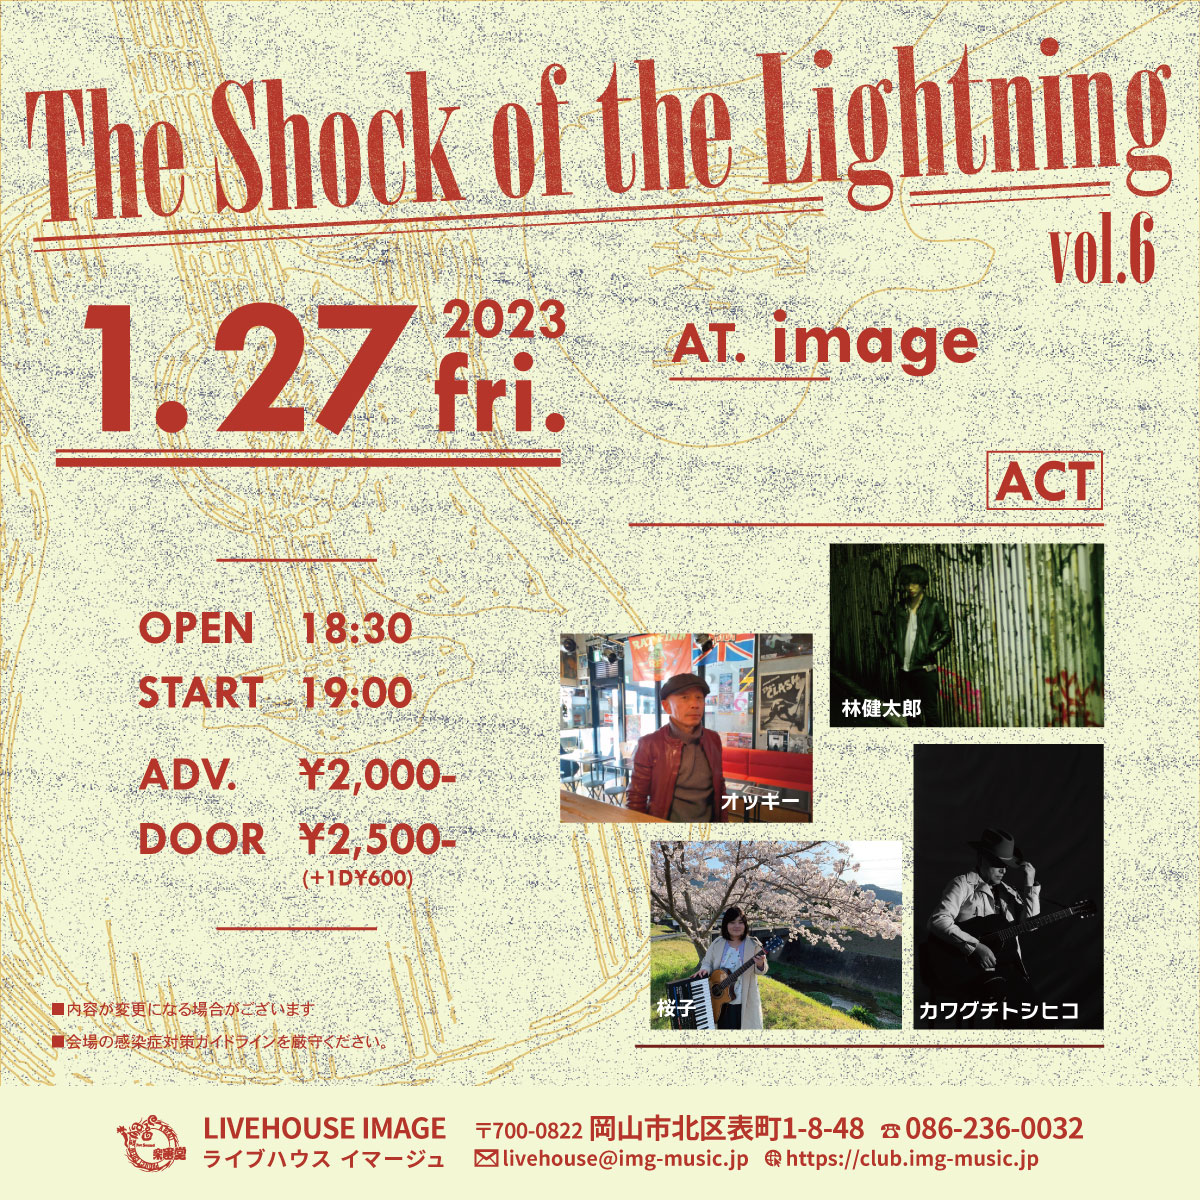 The Shock of the Lightning vol.6